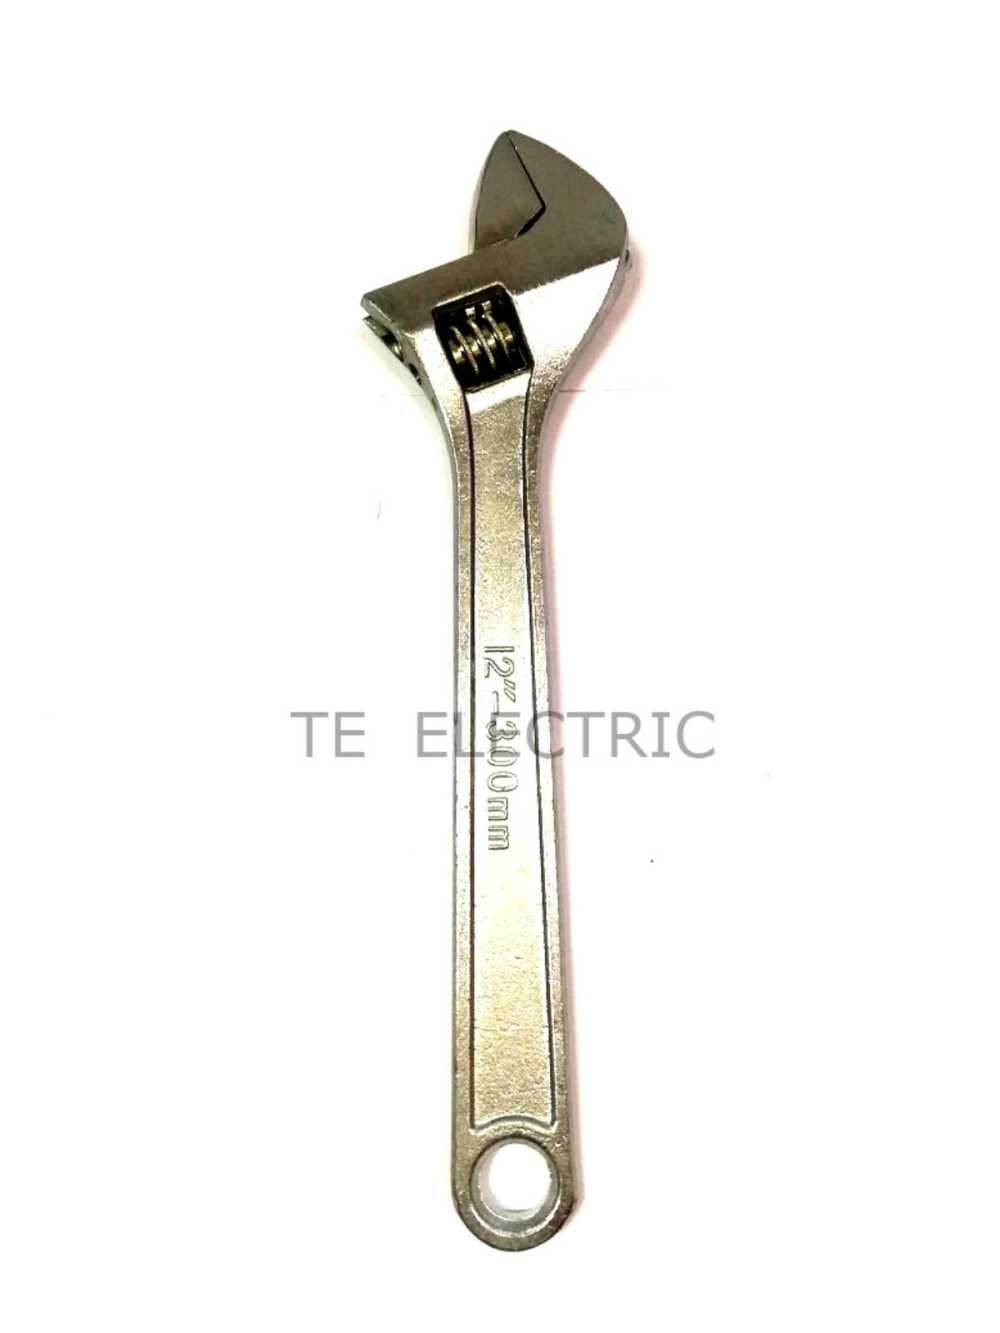 10" / 12" 250MM / 300 MM ADJUSTABLE SPANNER CHROMED DROP FORGED 10 INCH / 12 INCH ADJUSTABLE WRENCH